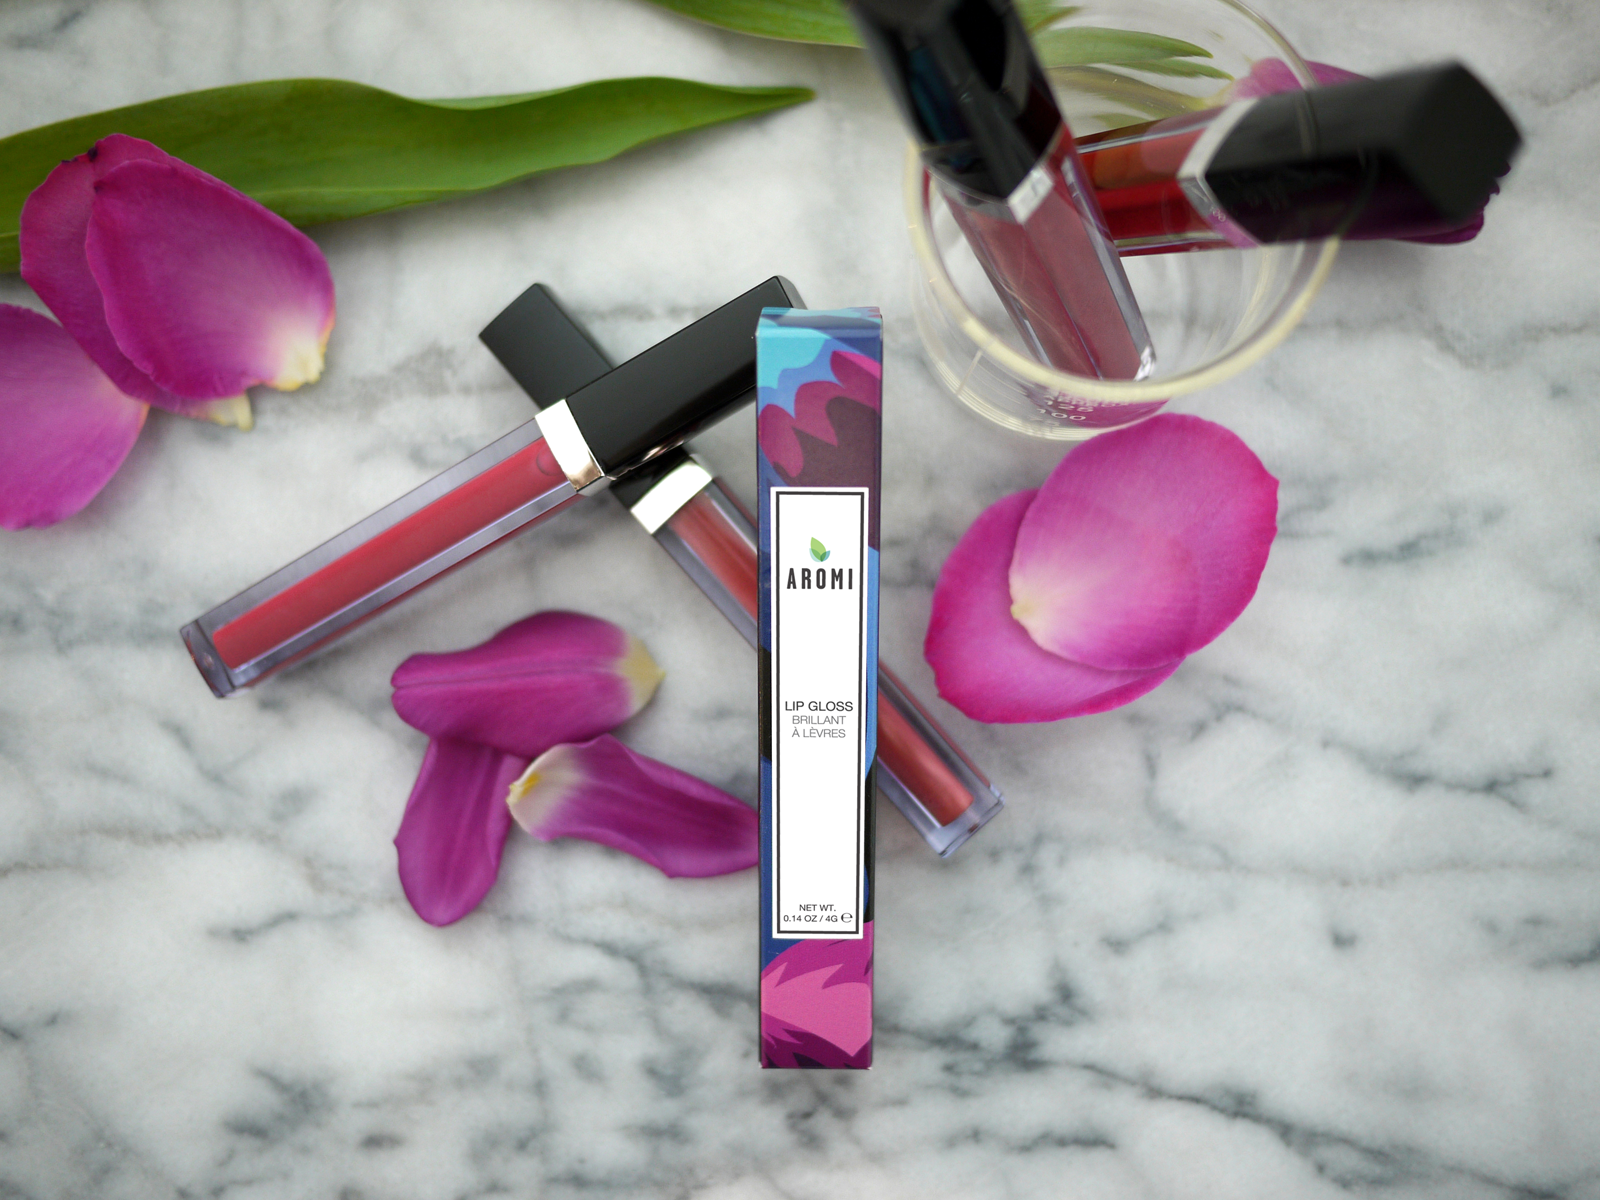 Aromi Lip Gloss - Handmade in small batches with the finest ingredients. Aromi lip gloss has a non-stick formula that gives a high-shine lip and comes in a wide variety of colors.